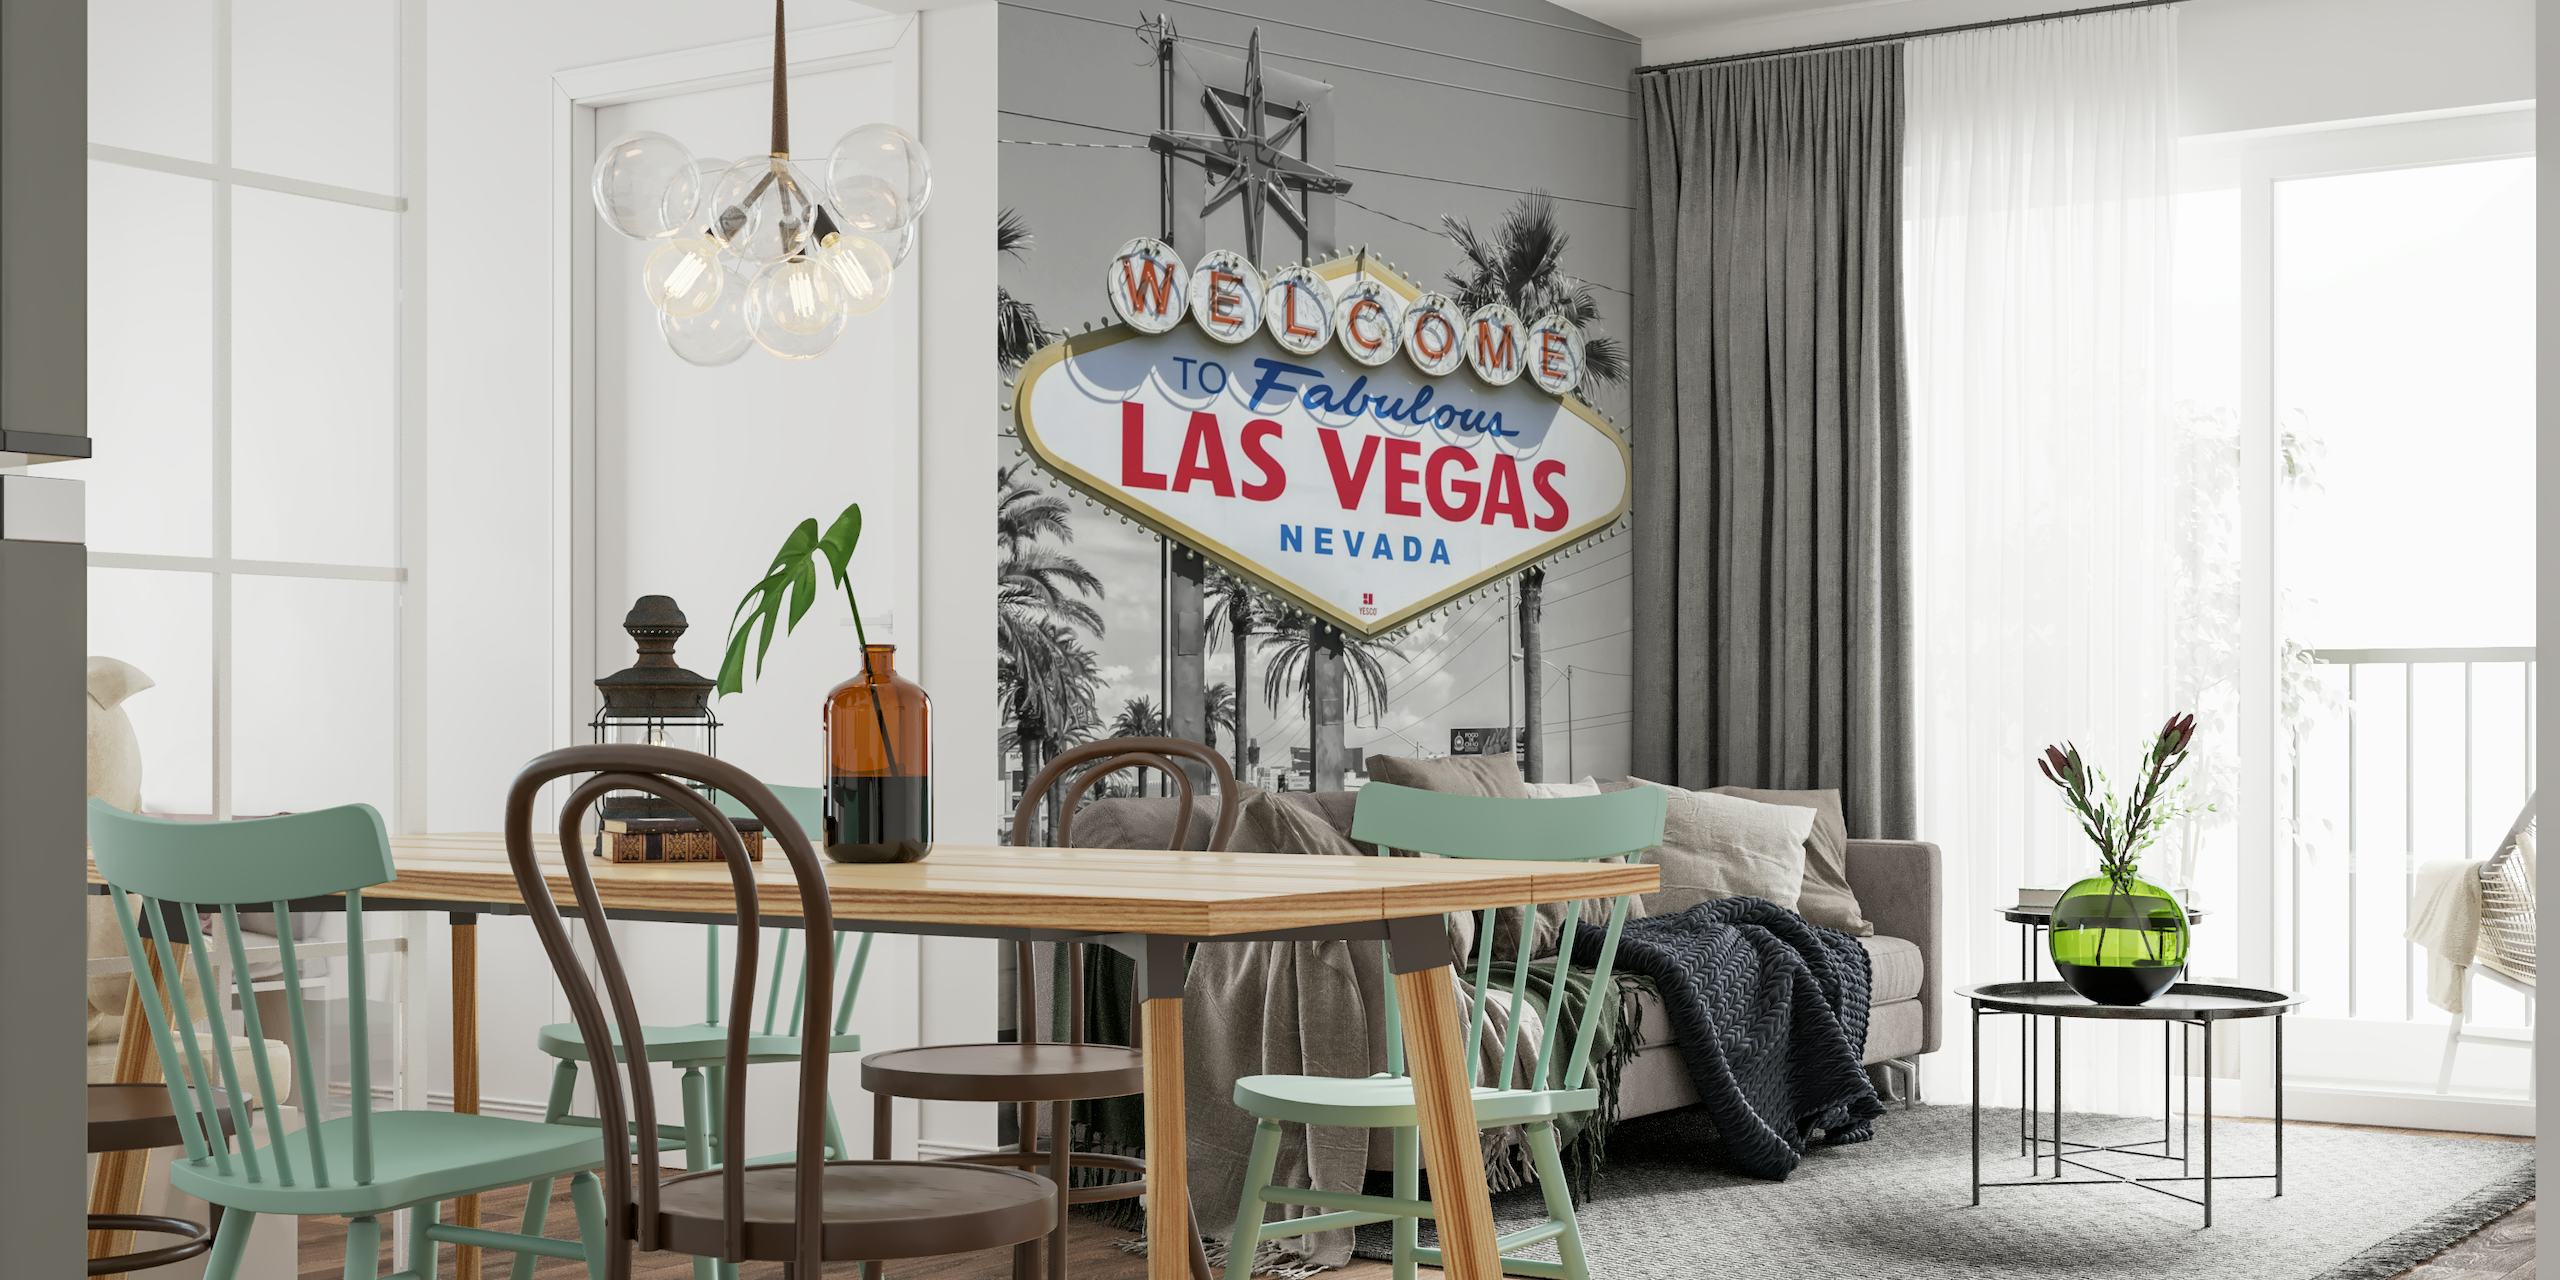 Las Vegas sign in colorkey with black and white background